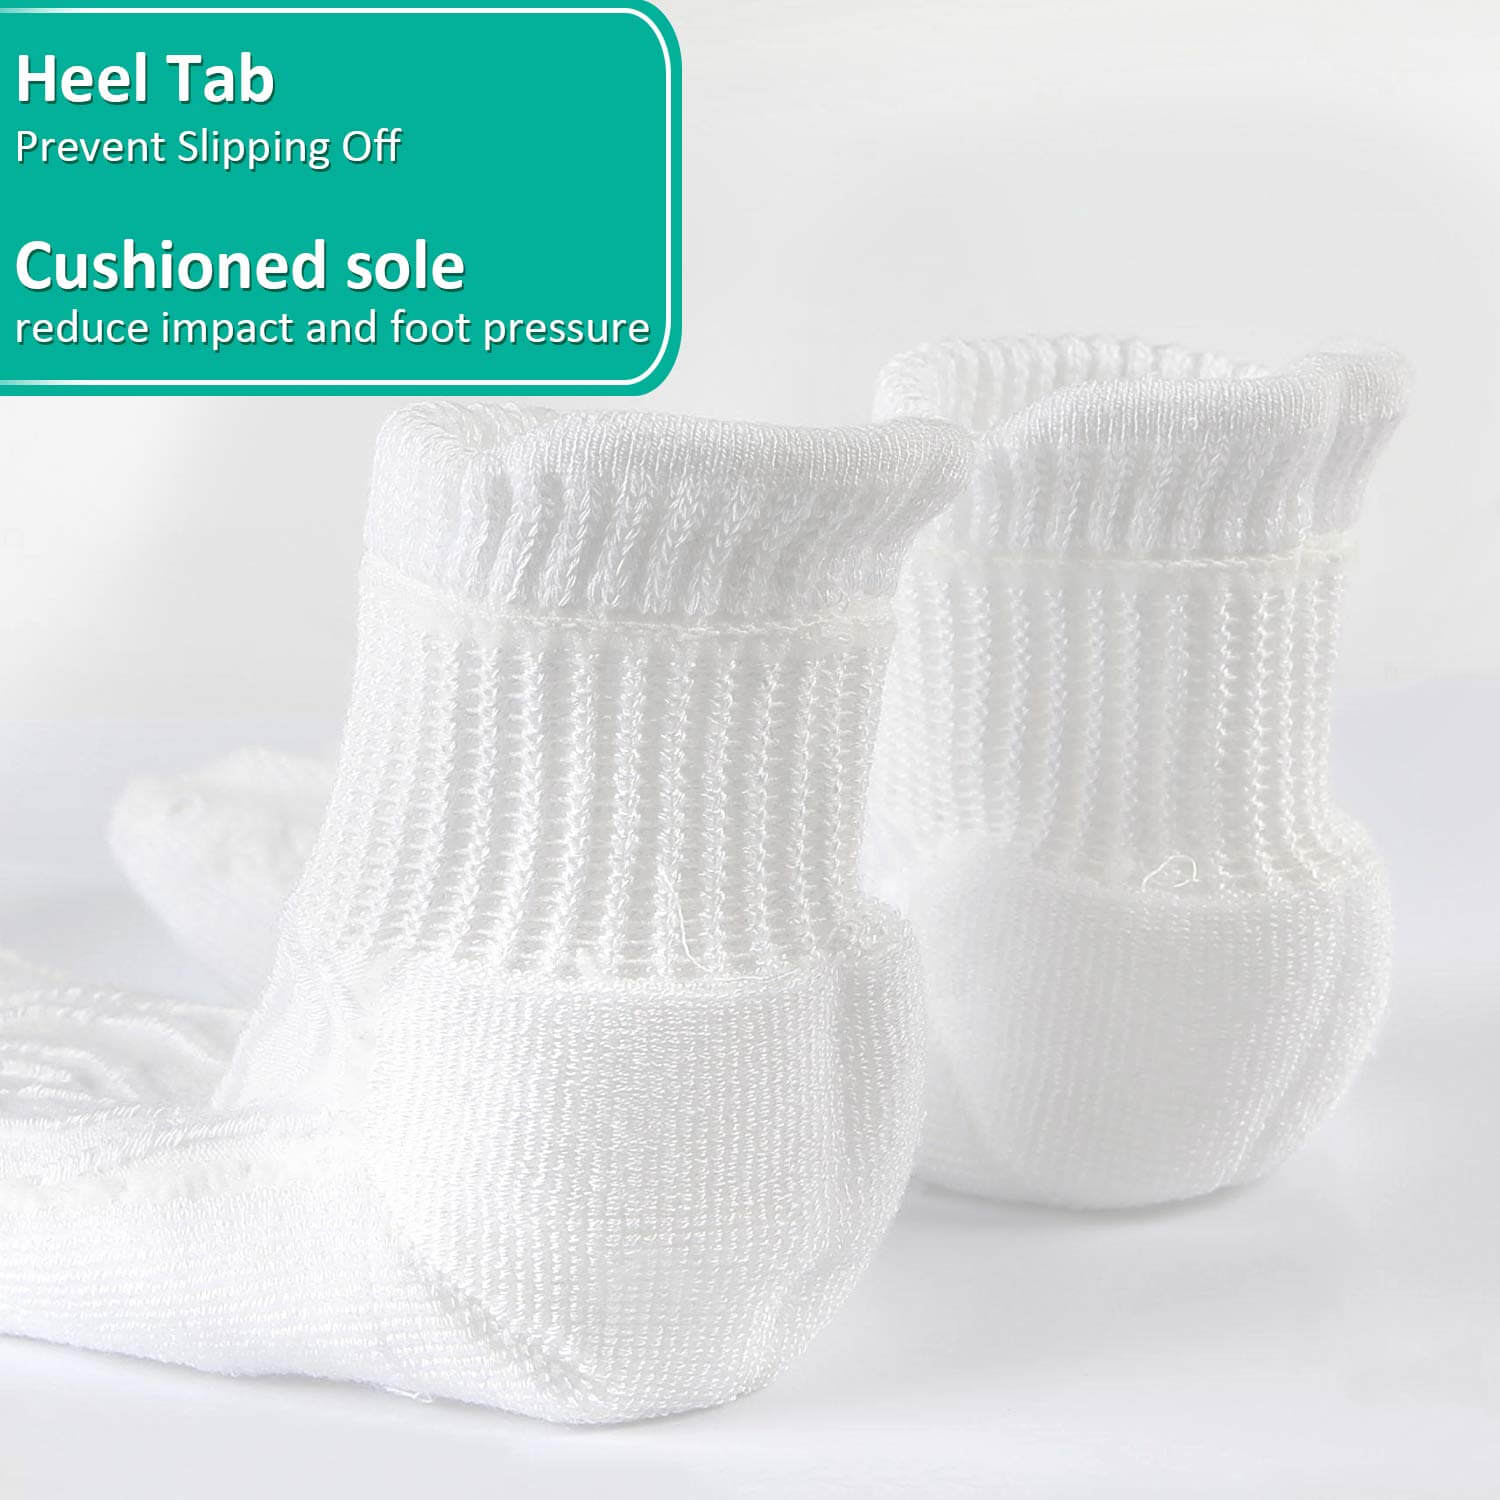 Wide non-binding Bamboo diabetic socks, seamless toe, air vent with cushion sole, 6 pairs - md-diab